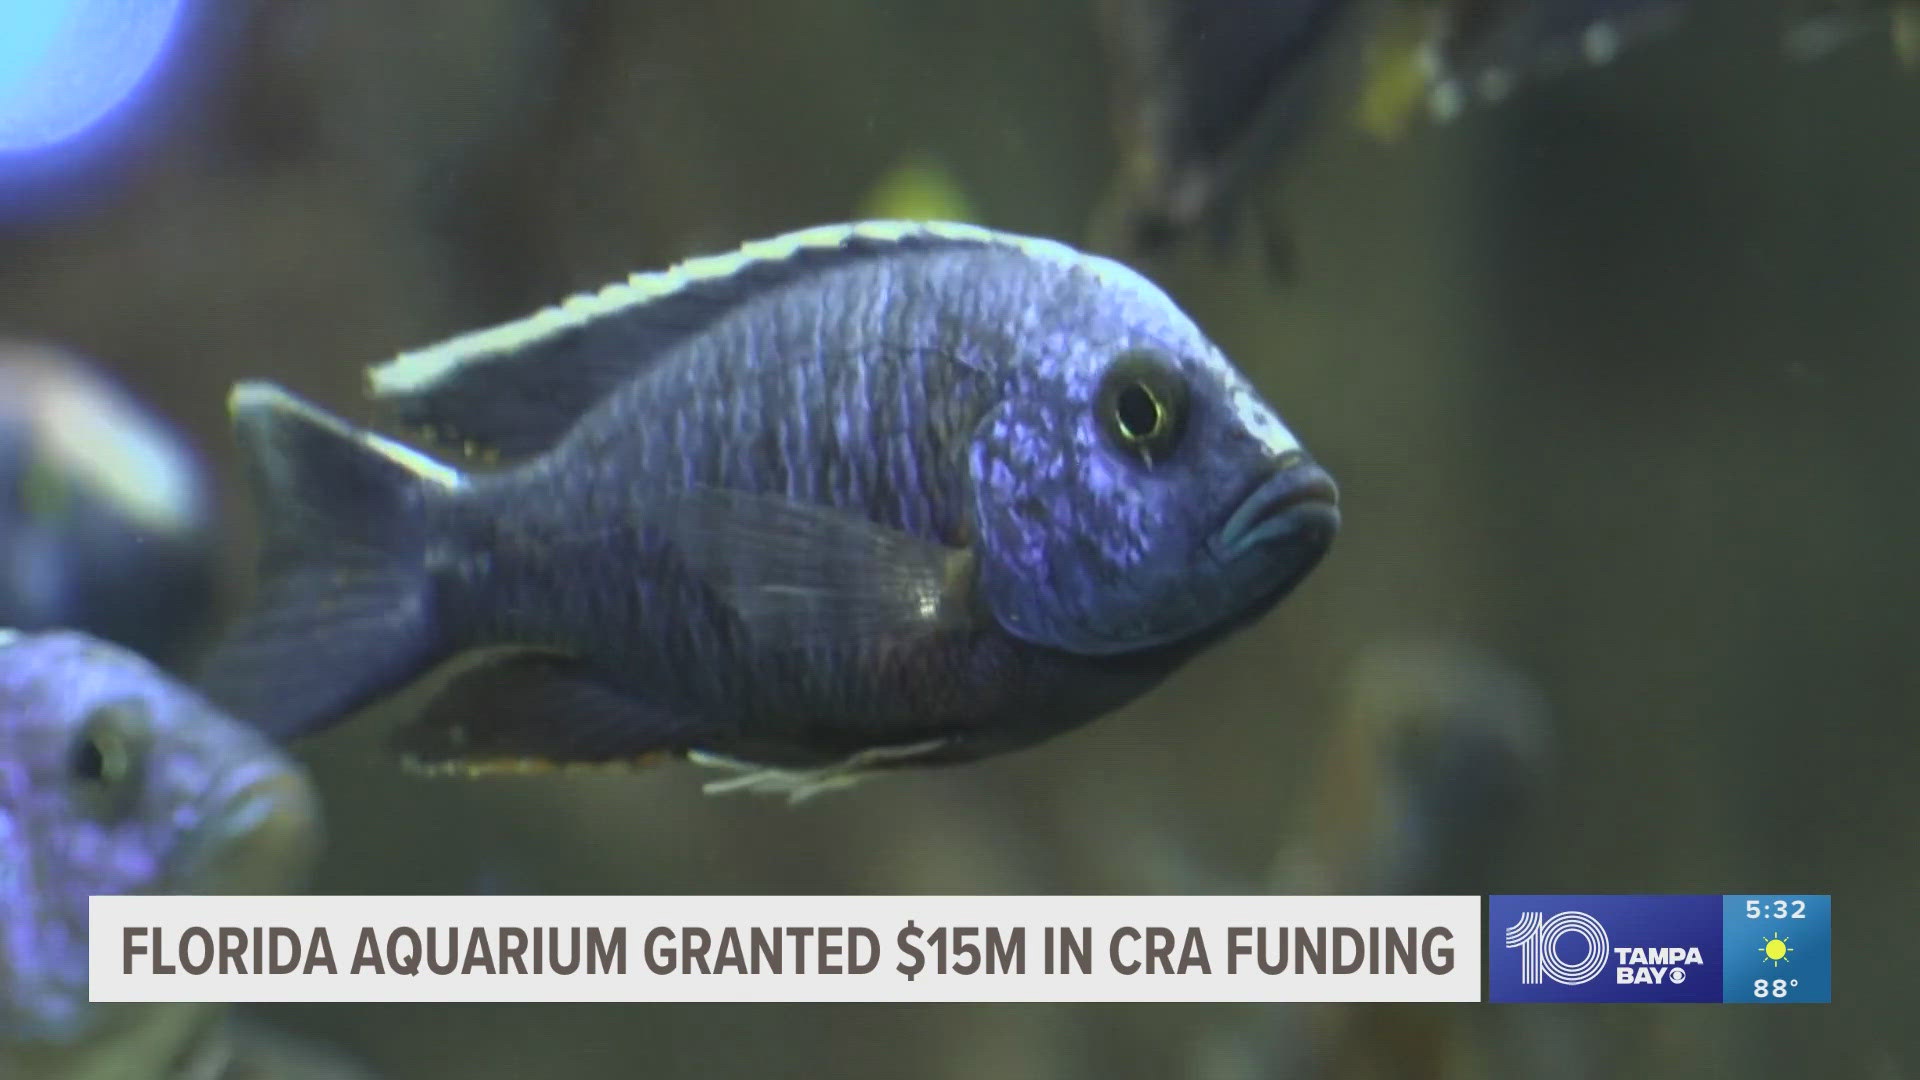 Florida Aquarium president Roger Germann says the planned redevelopment includes four new exhibits.